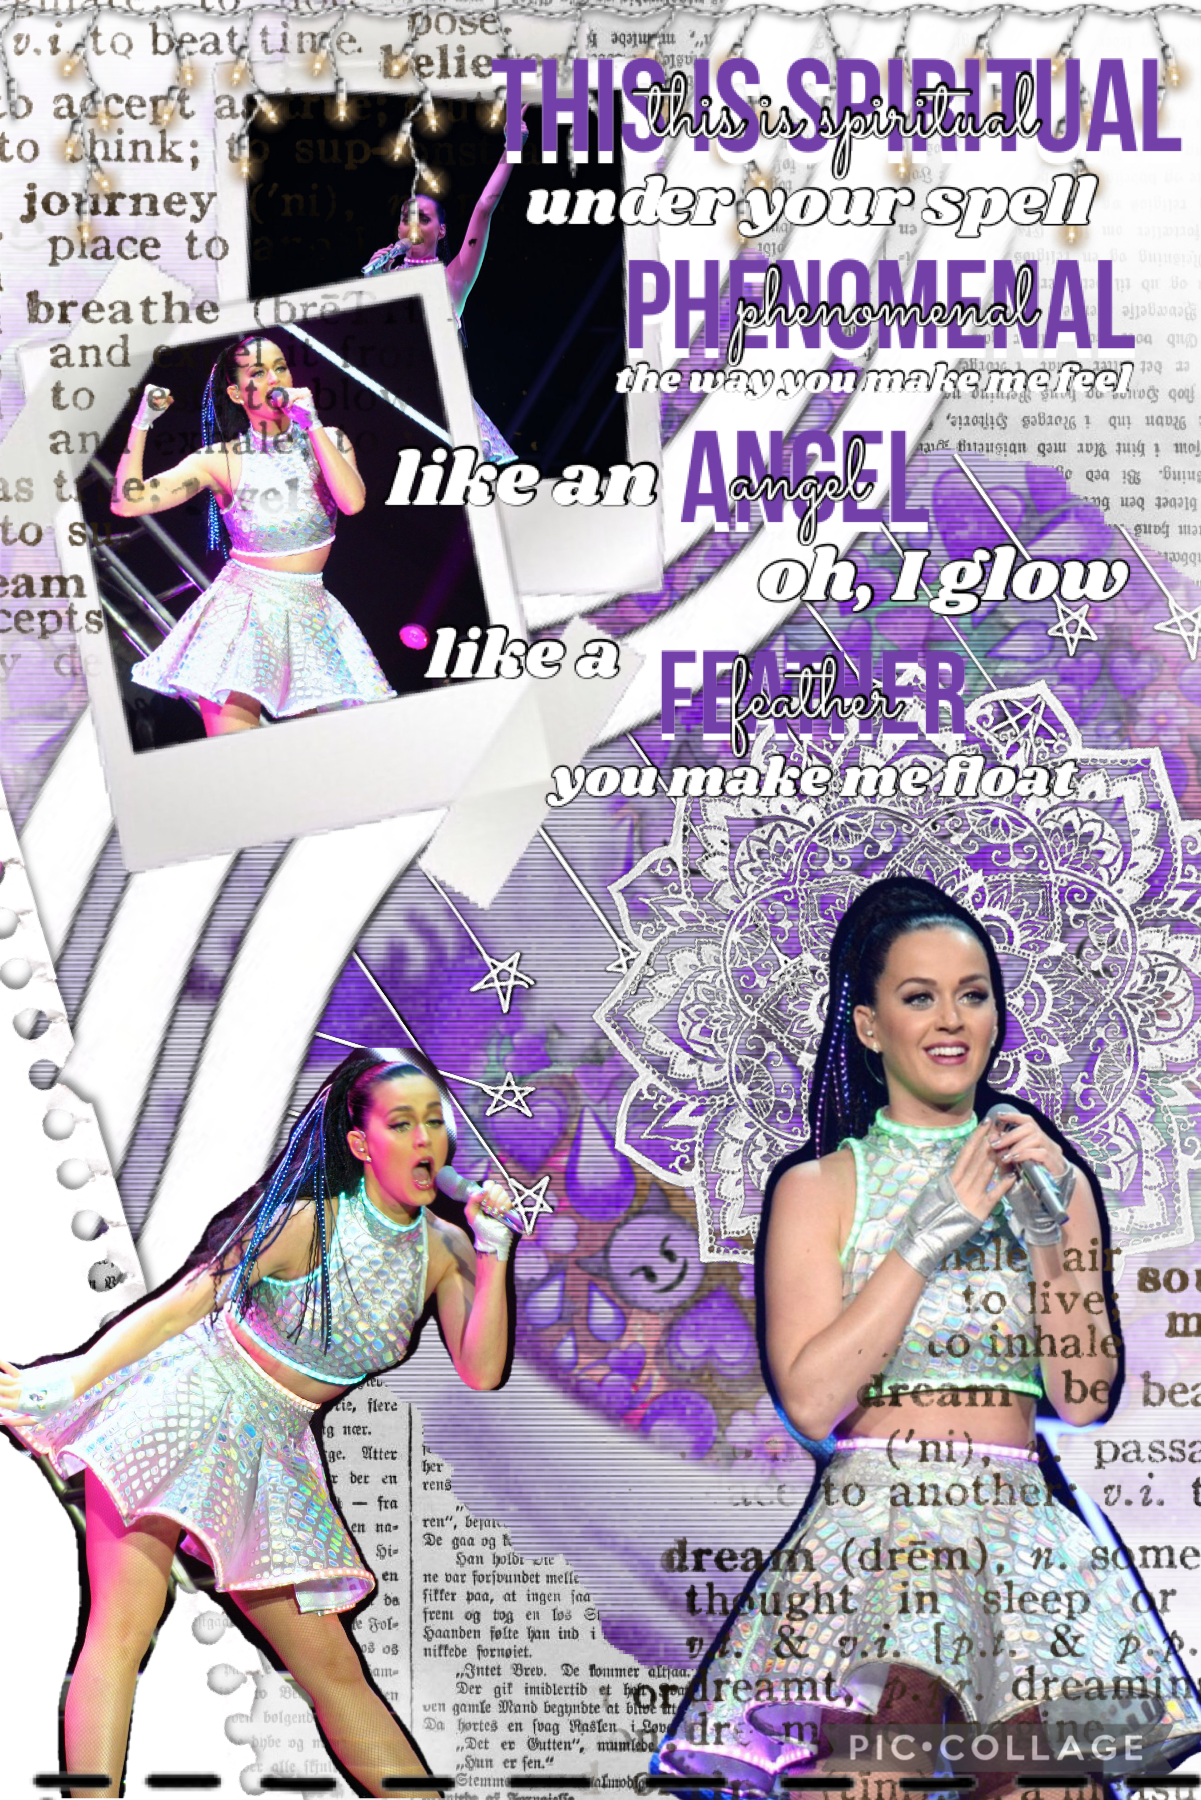 💜 TAP 💜
💜 Katy Perry ‘Spritual’ collage! 💜
💜 i quite like this ngl 💜
💜 sorry for not posting as much as normal ive been really busy 😂 💜
💜 i am tired… as normal 💜
💜 lst night i cried myself to sleep 😭 💜
💜 ilysm 💜